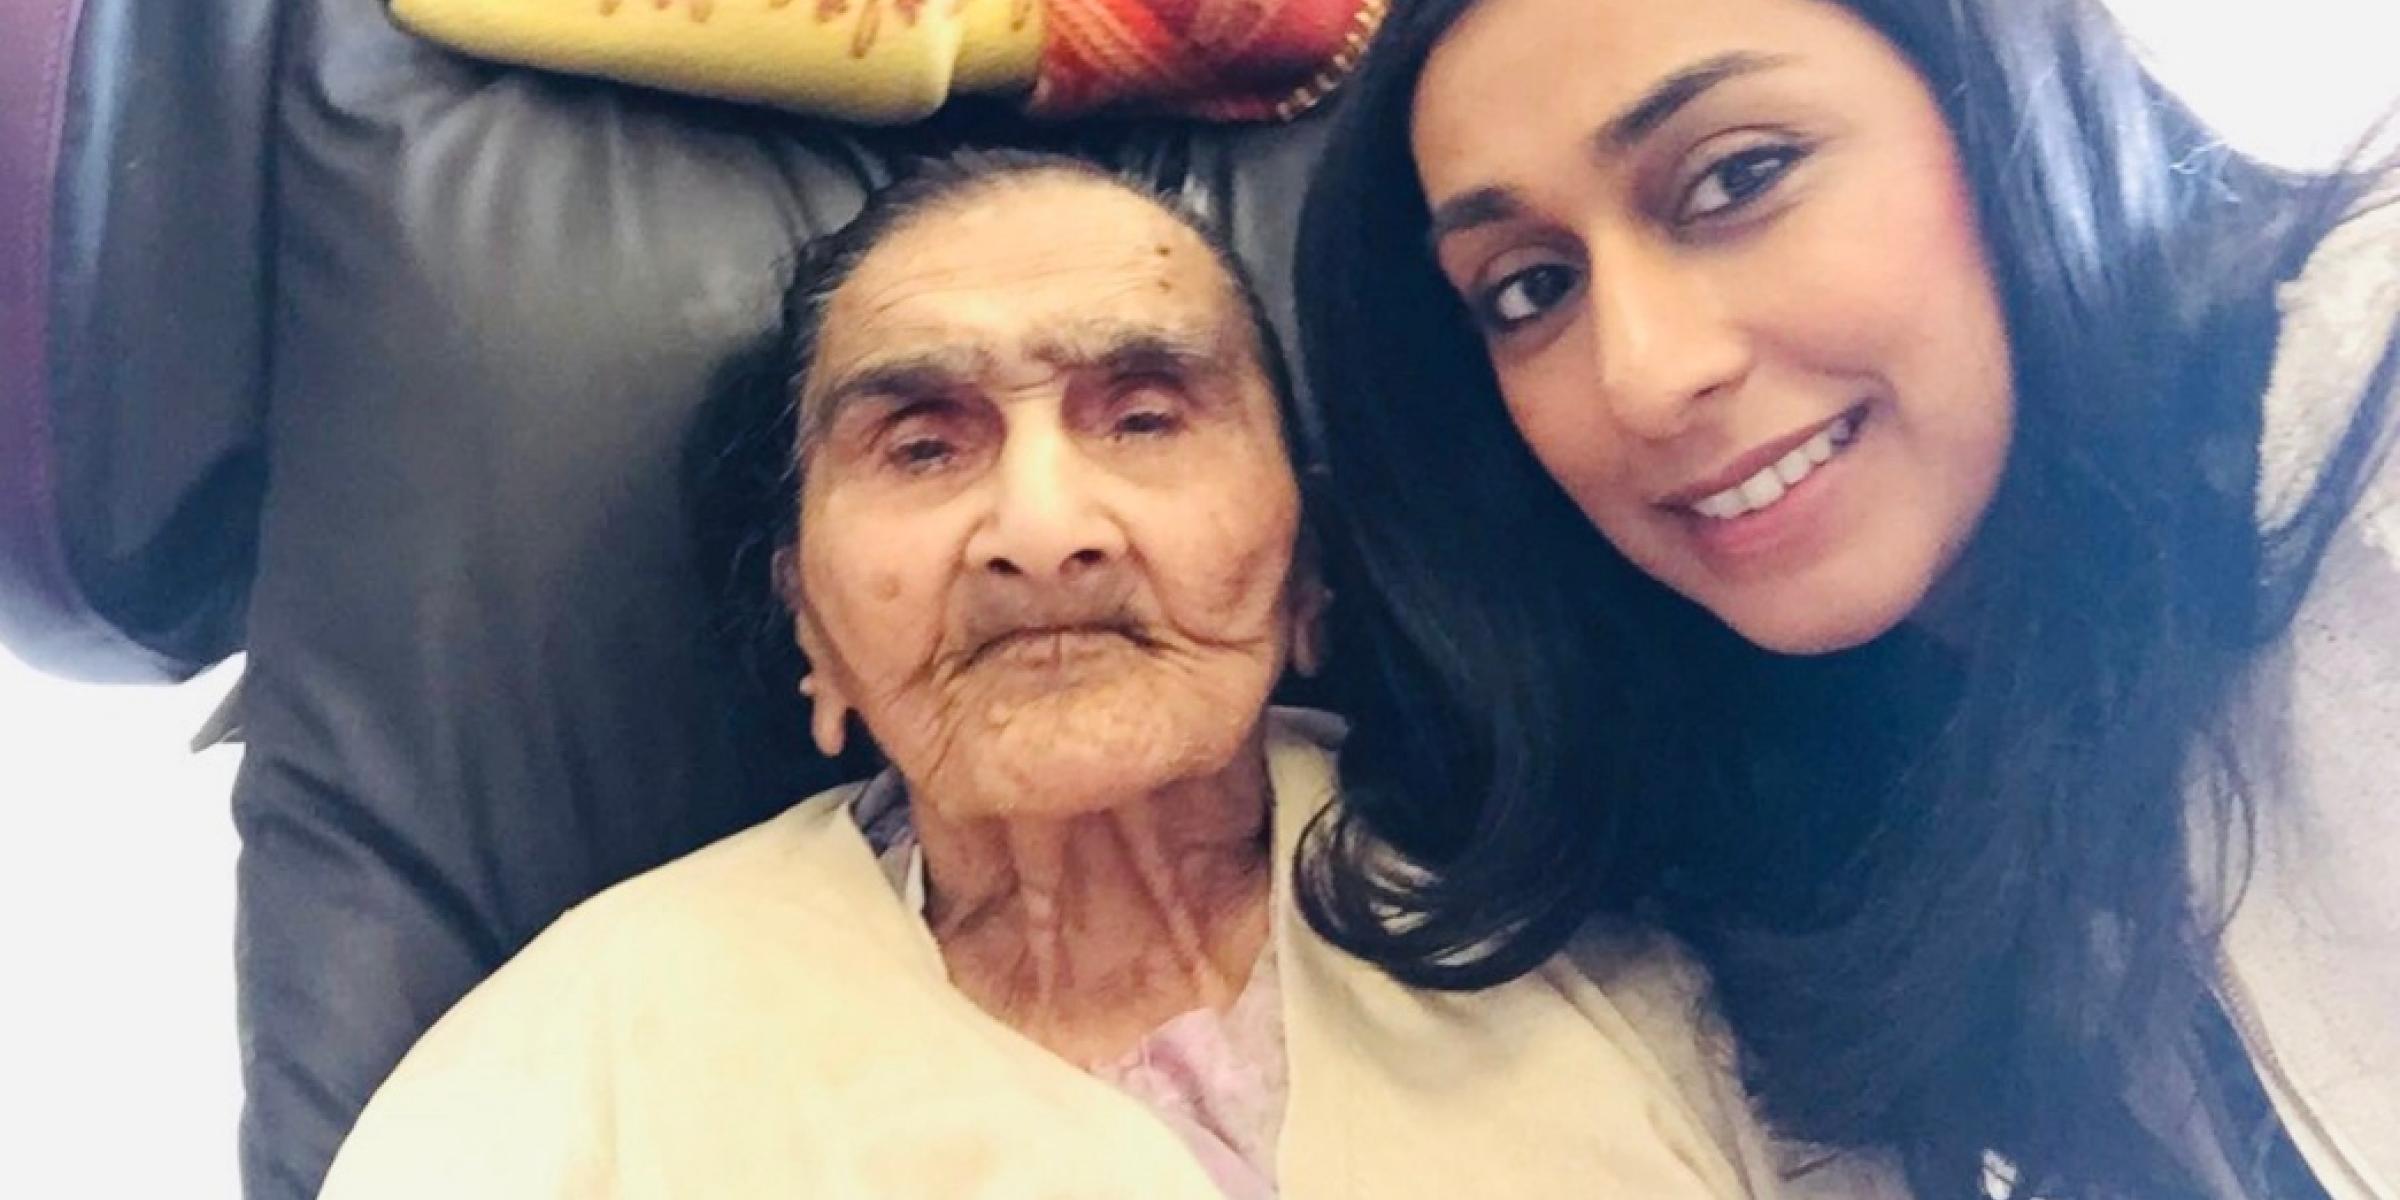 Lavina taking a picture with her Nani, who is sat in an armchair